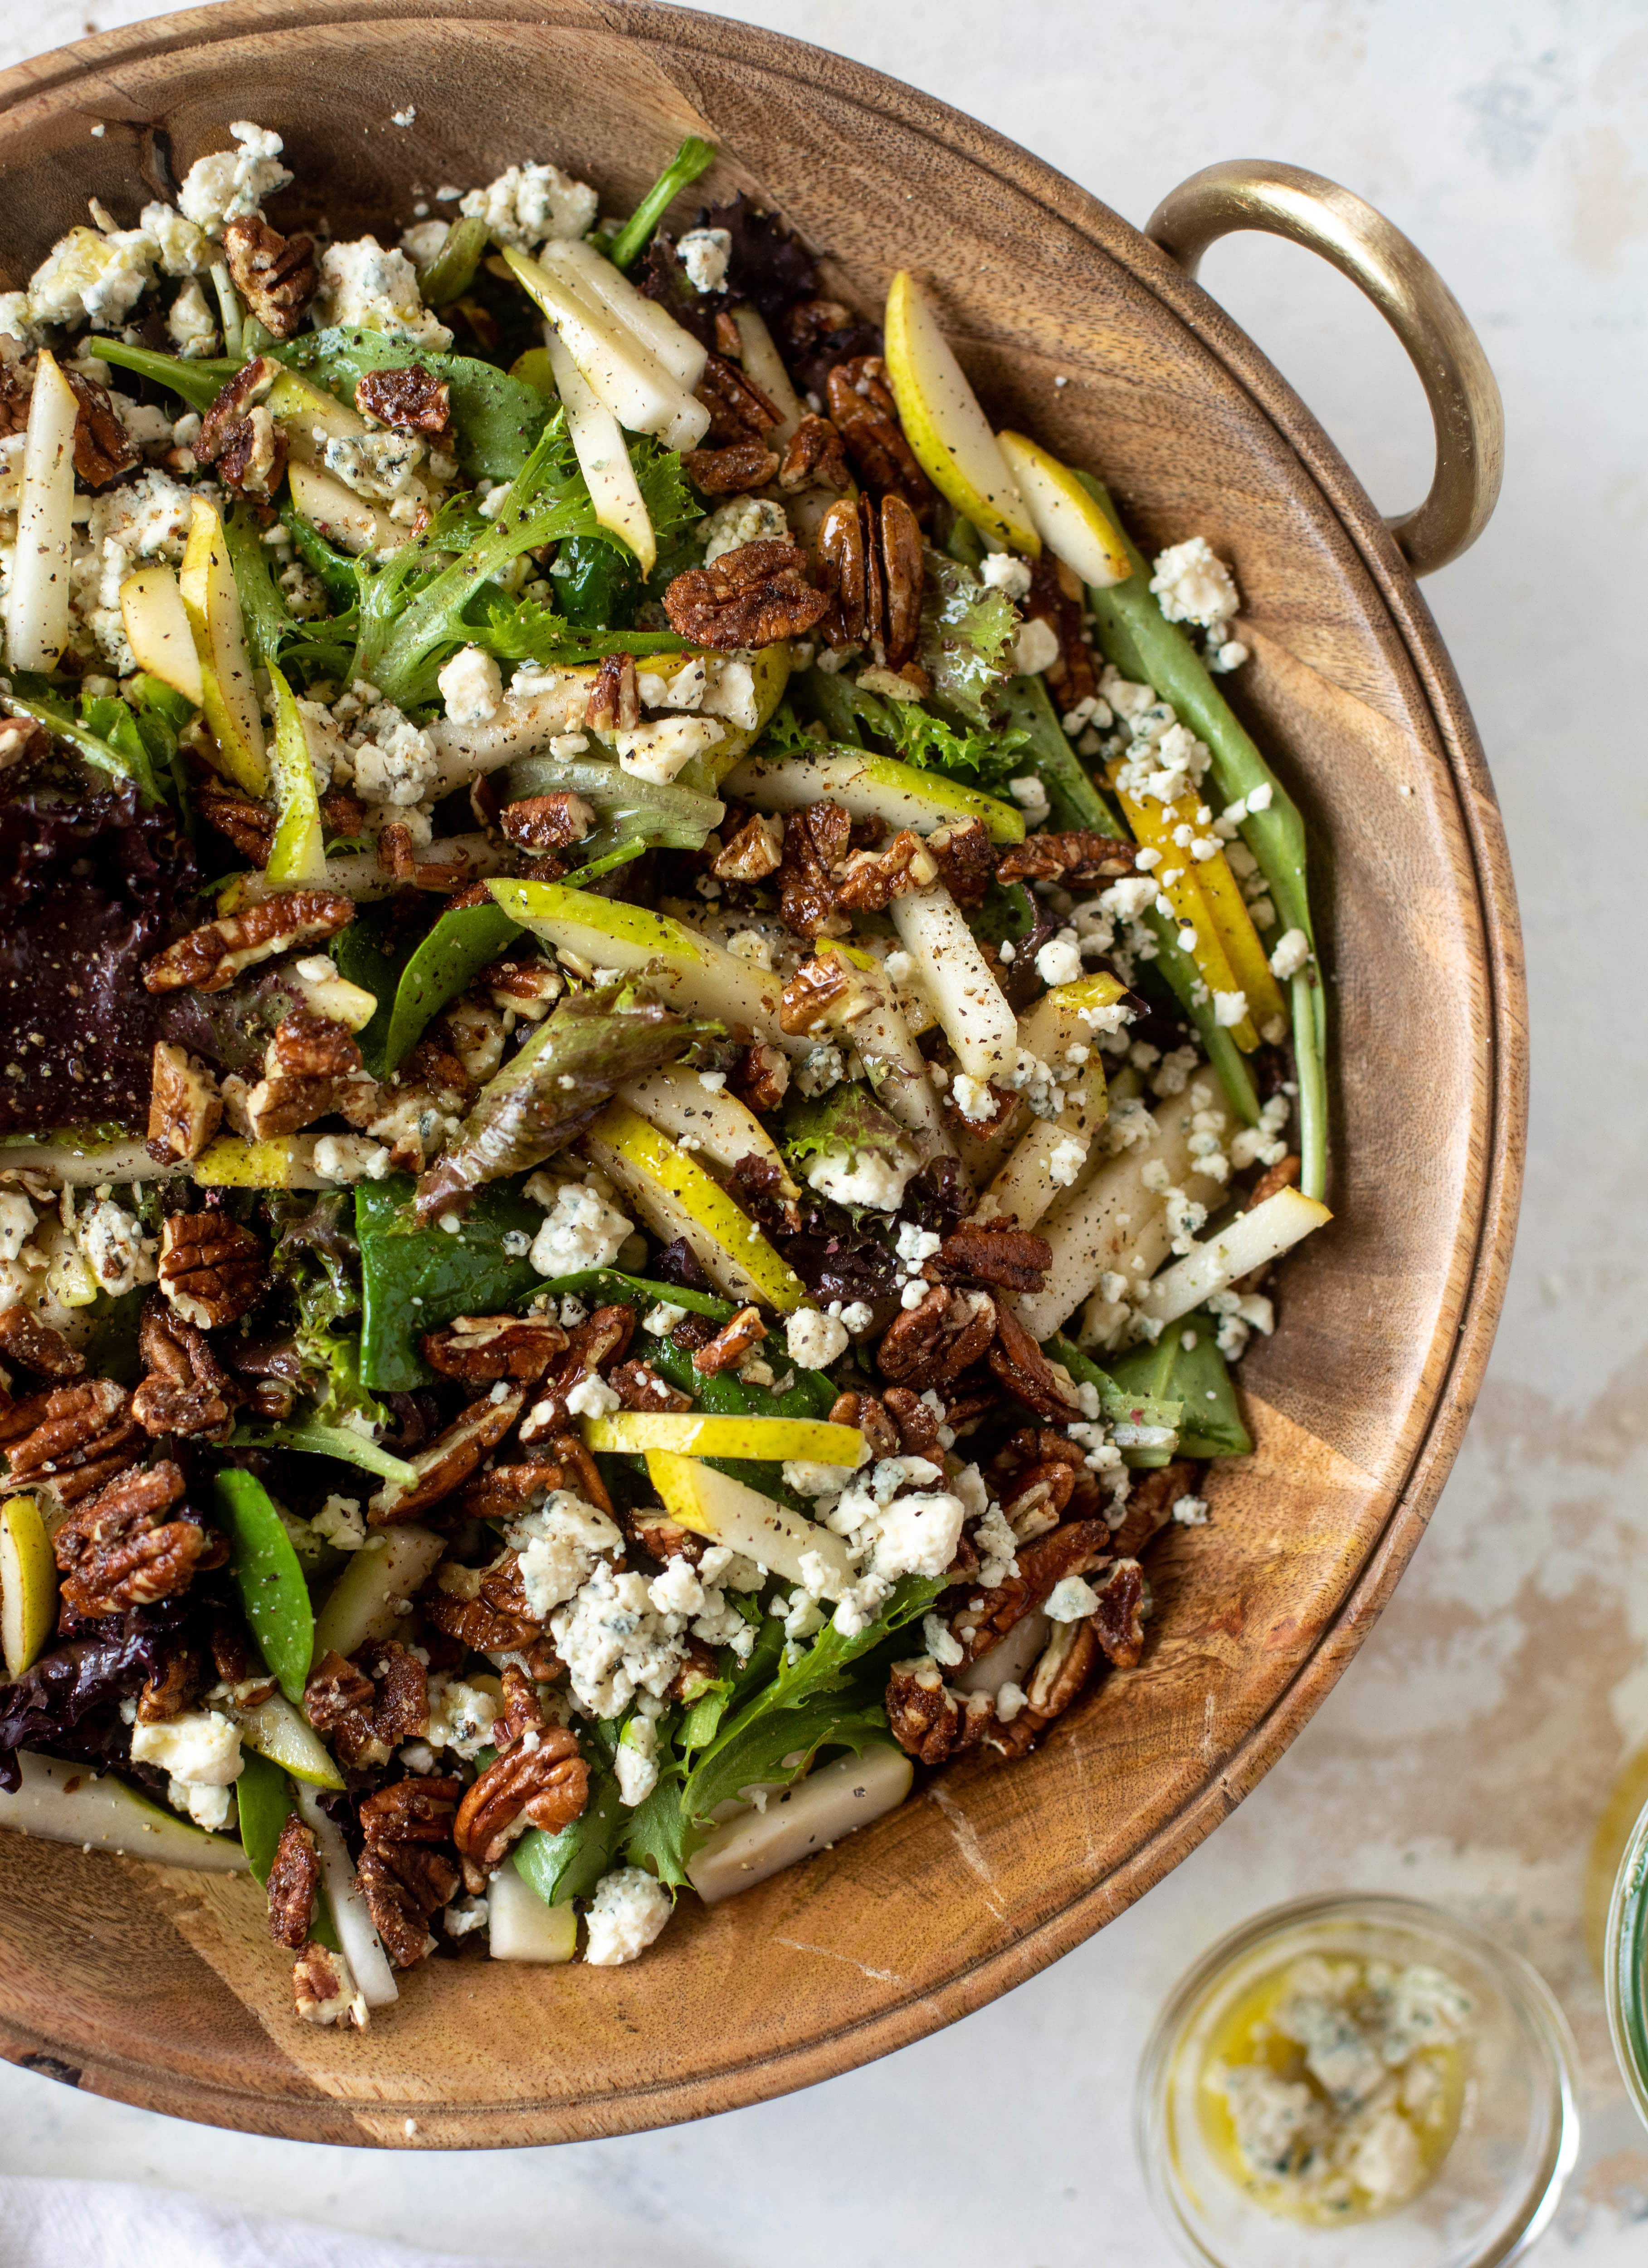 This pear gorgonzola is the perfect simple greens salad for the holiday and winter season! Topped with sweet and spicy pecans and champagne vinaigrette!